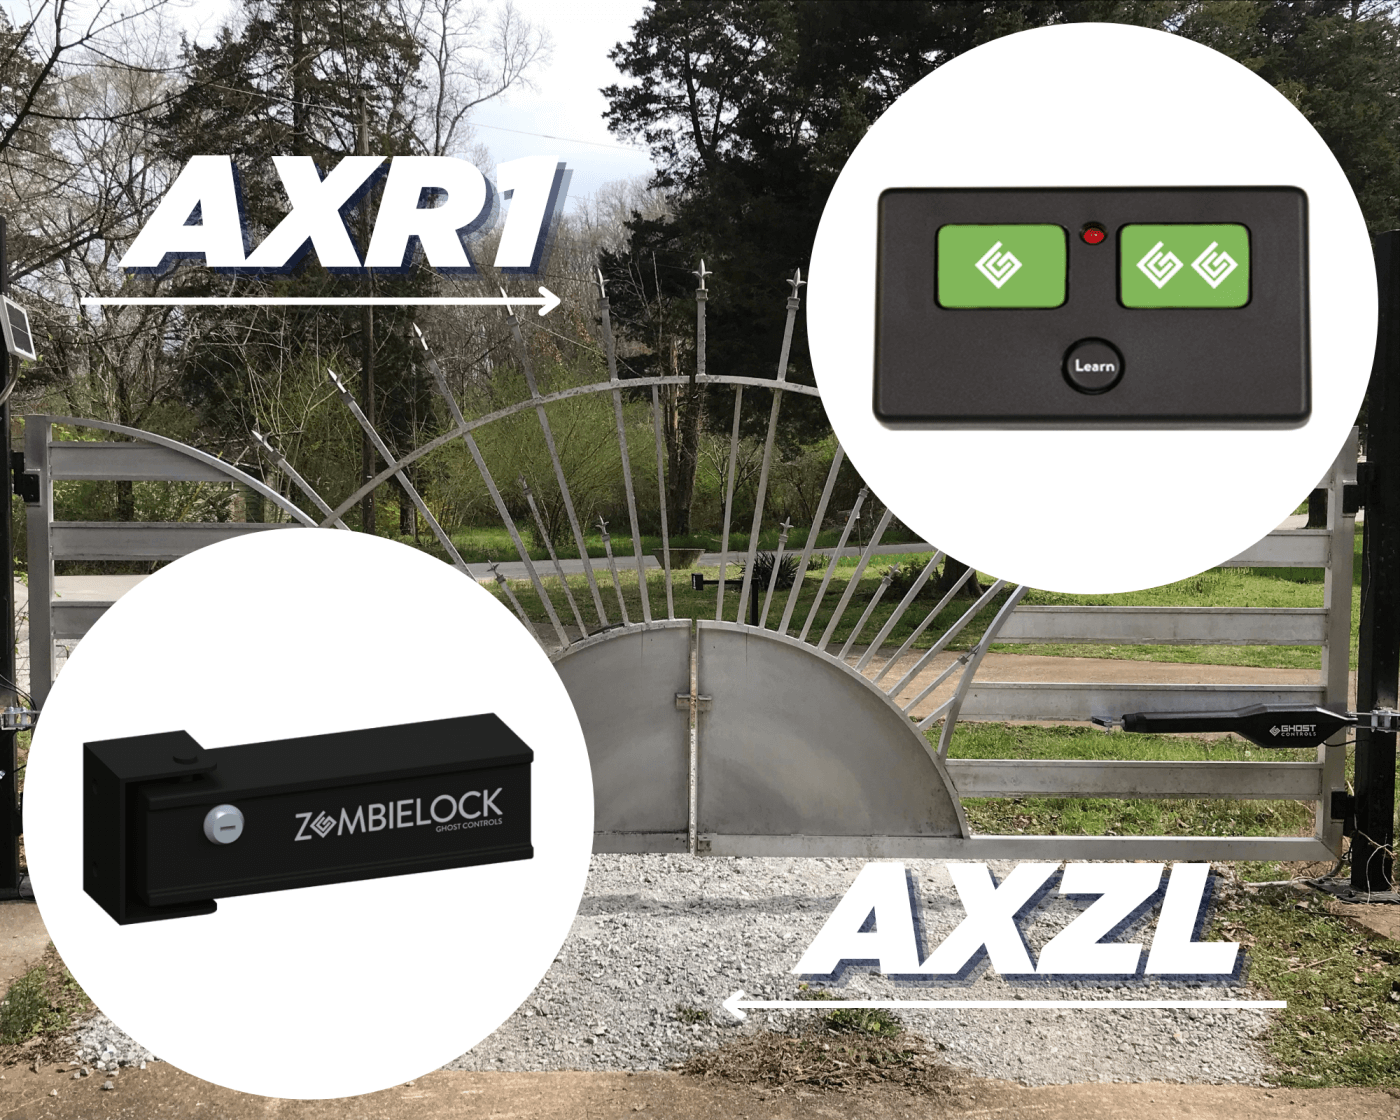 Installing A Water-Resistant Remote With A ZombieLock® to Your Automatic Gate